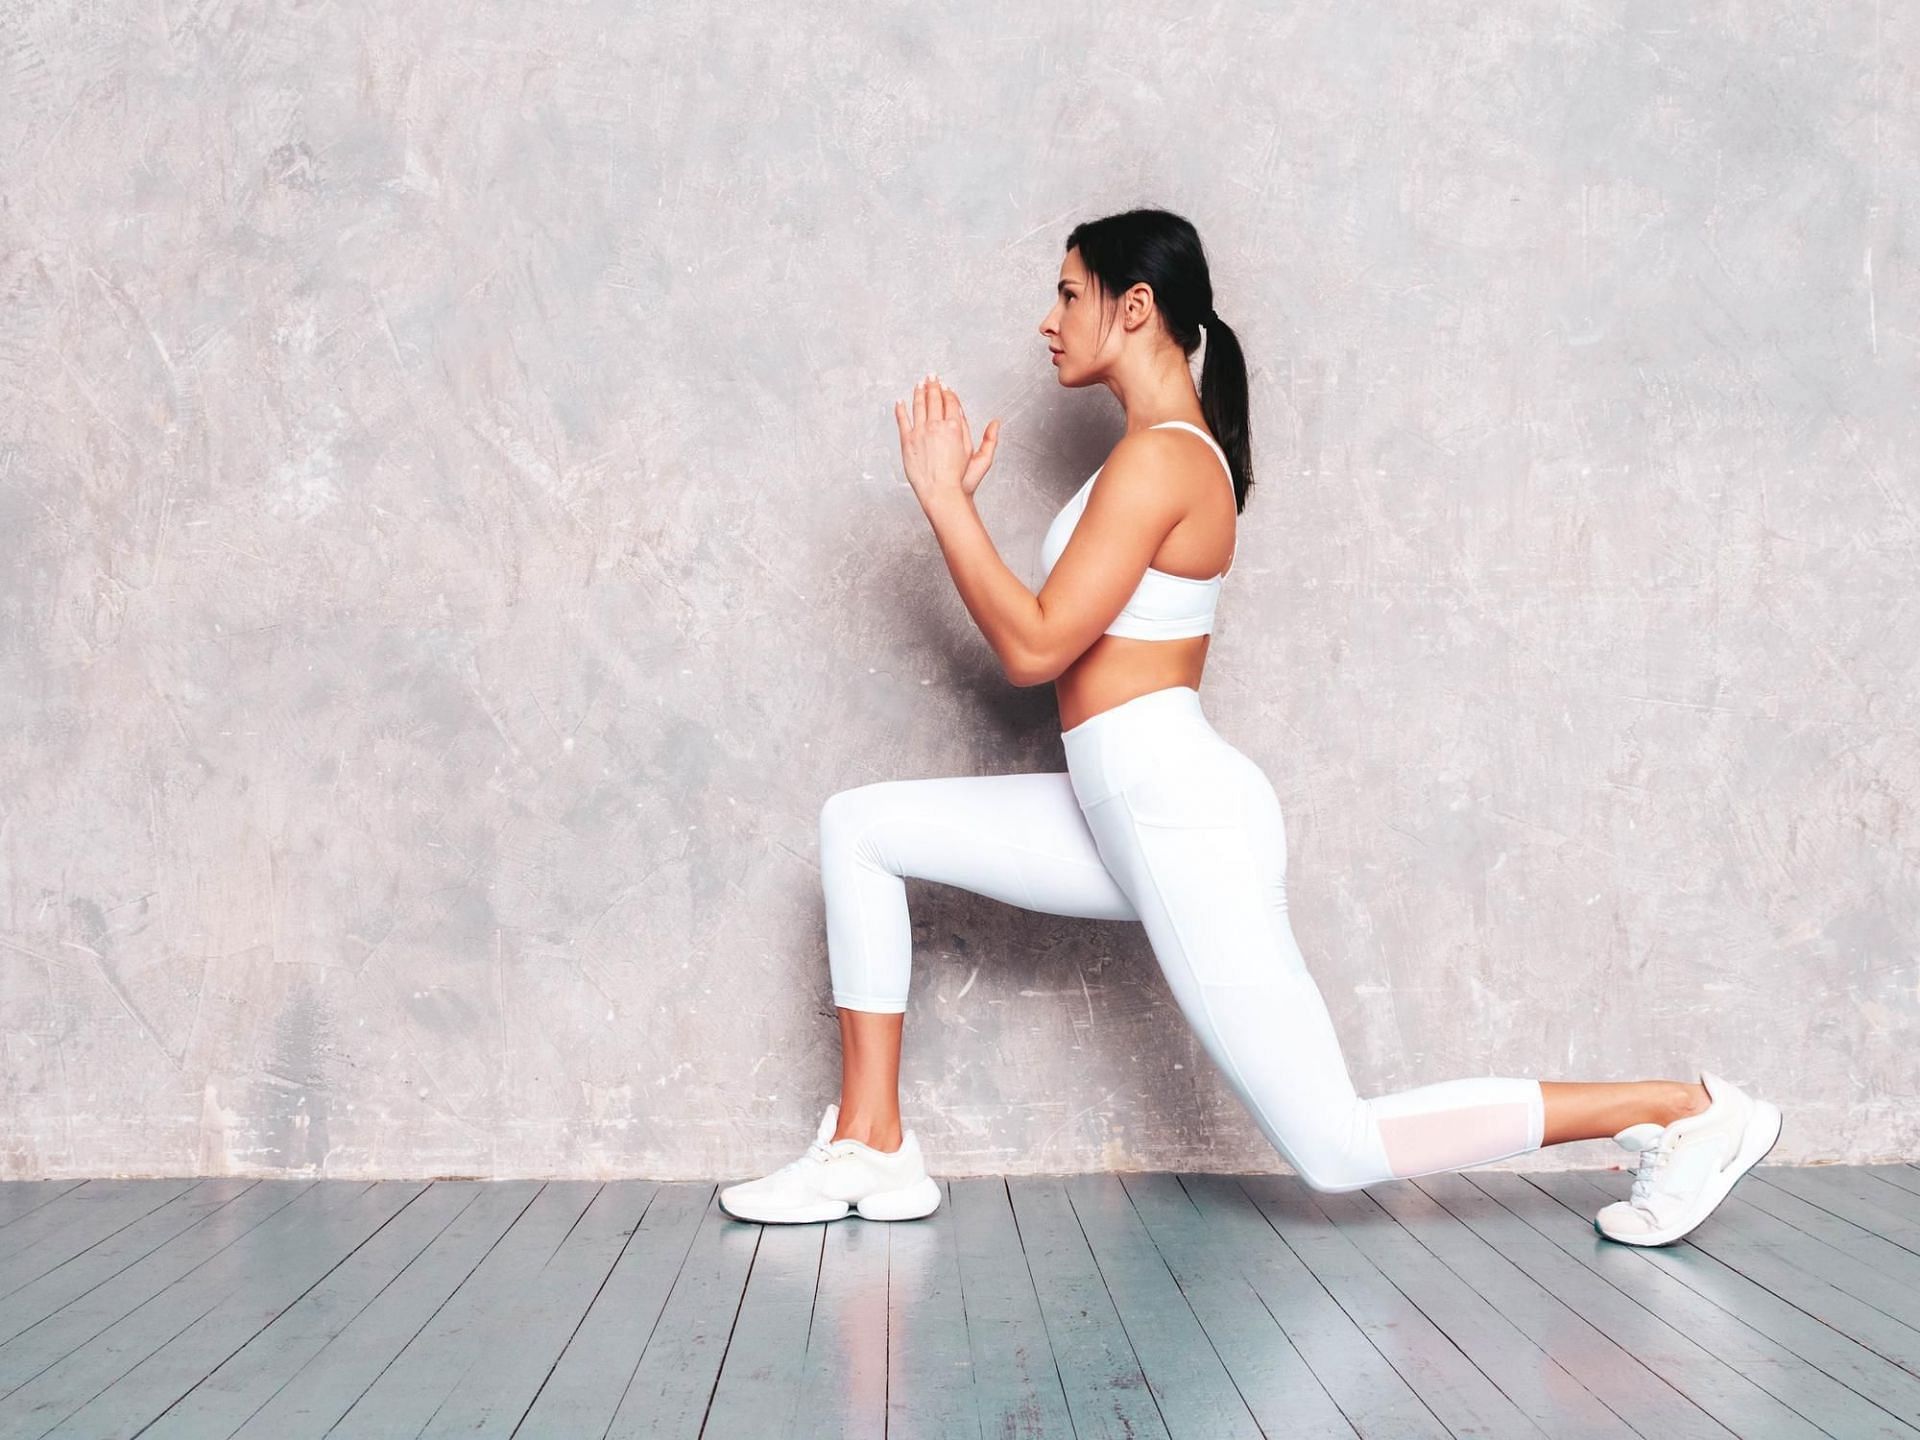 barre workouts at home: 6 Best Barre Workouts to Do at Home